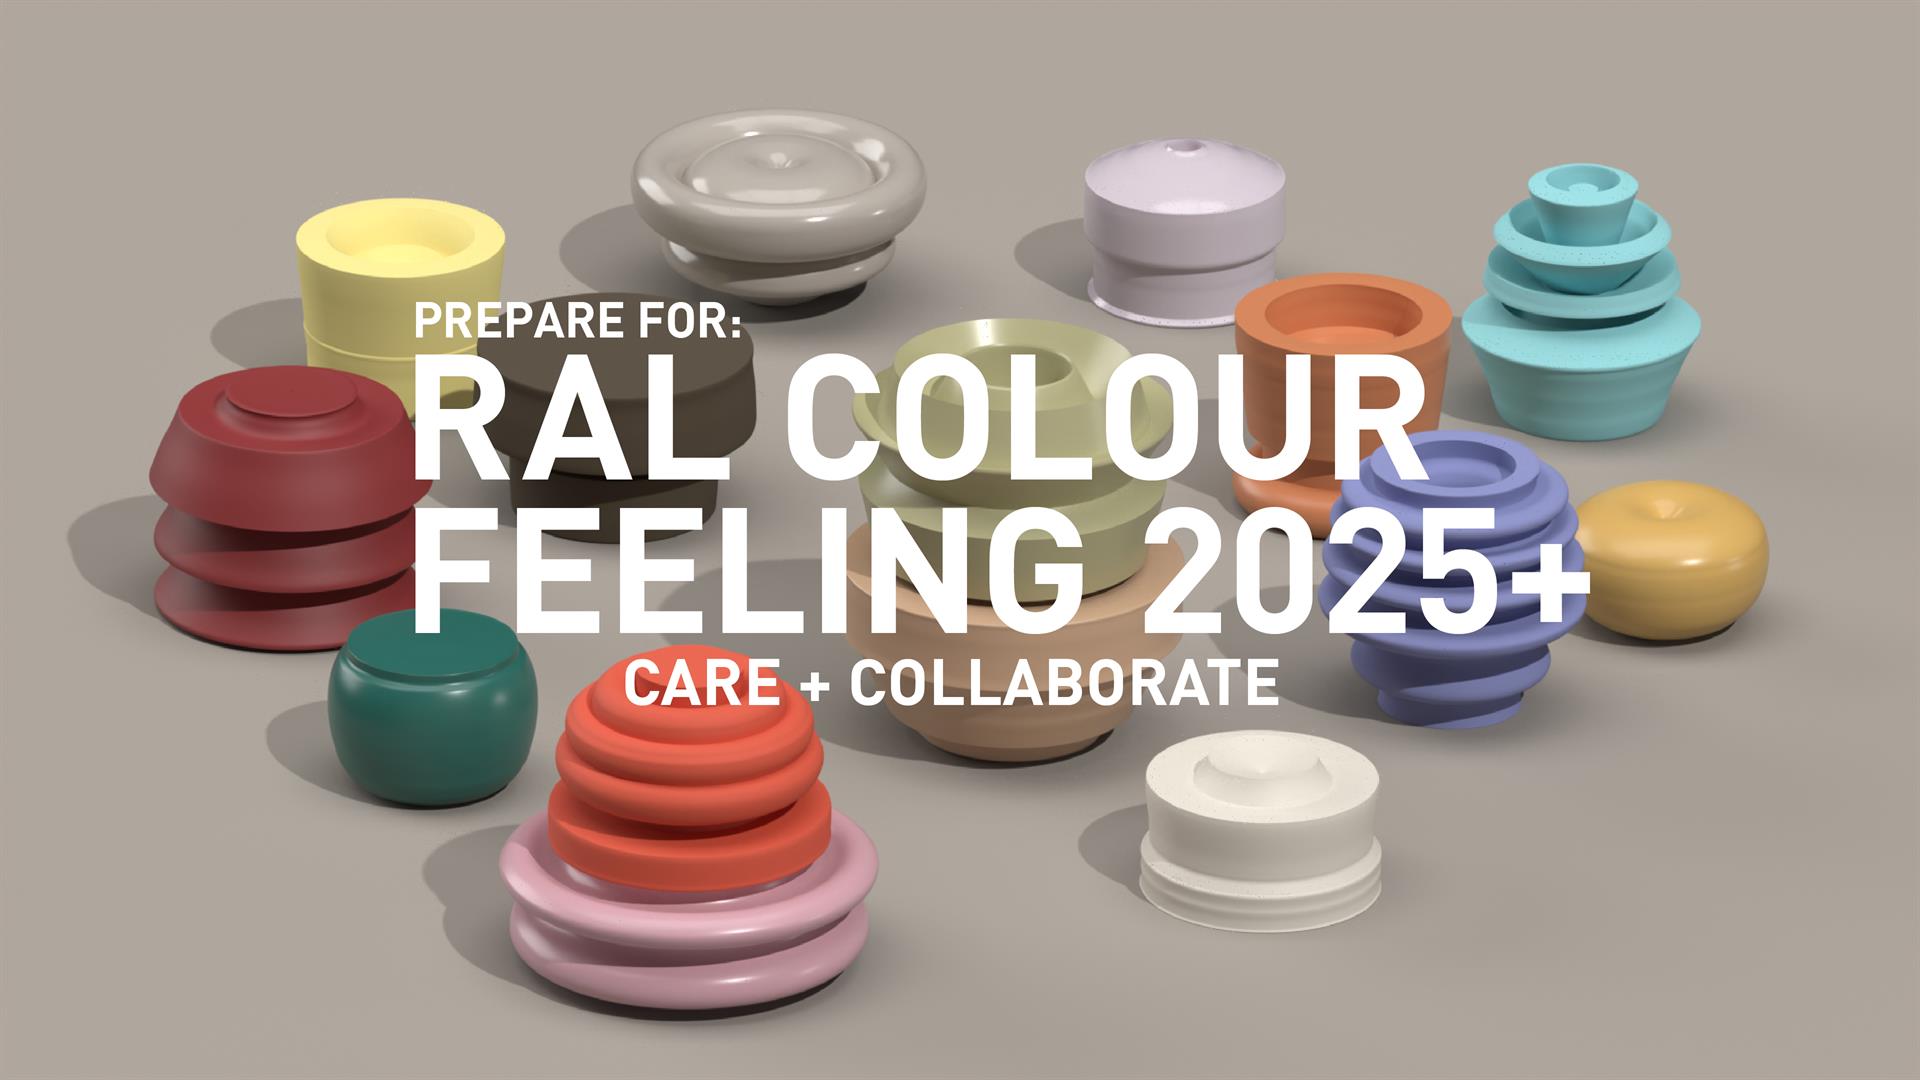 Save the Date! RAL COLOUR FEELING 2025+ 